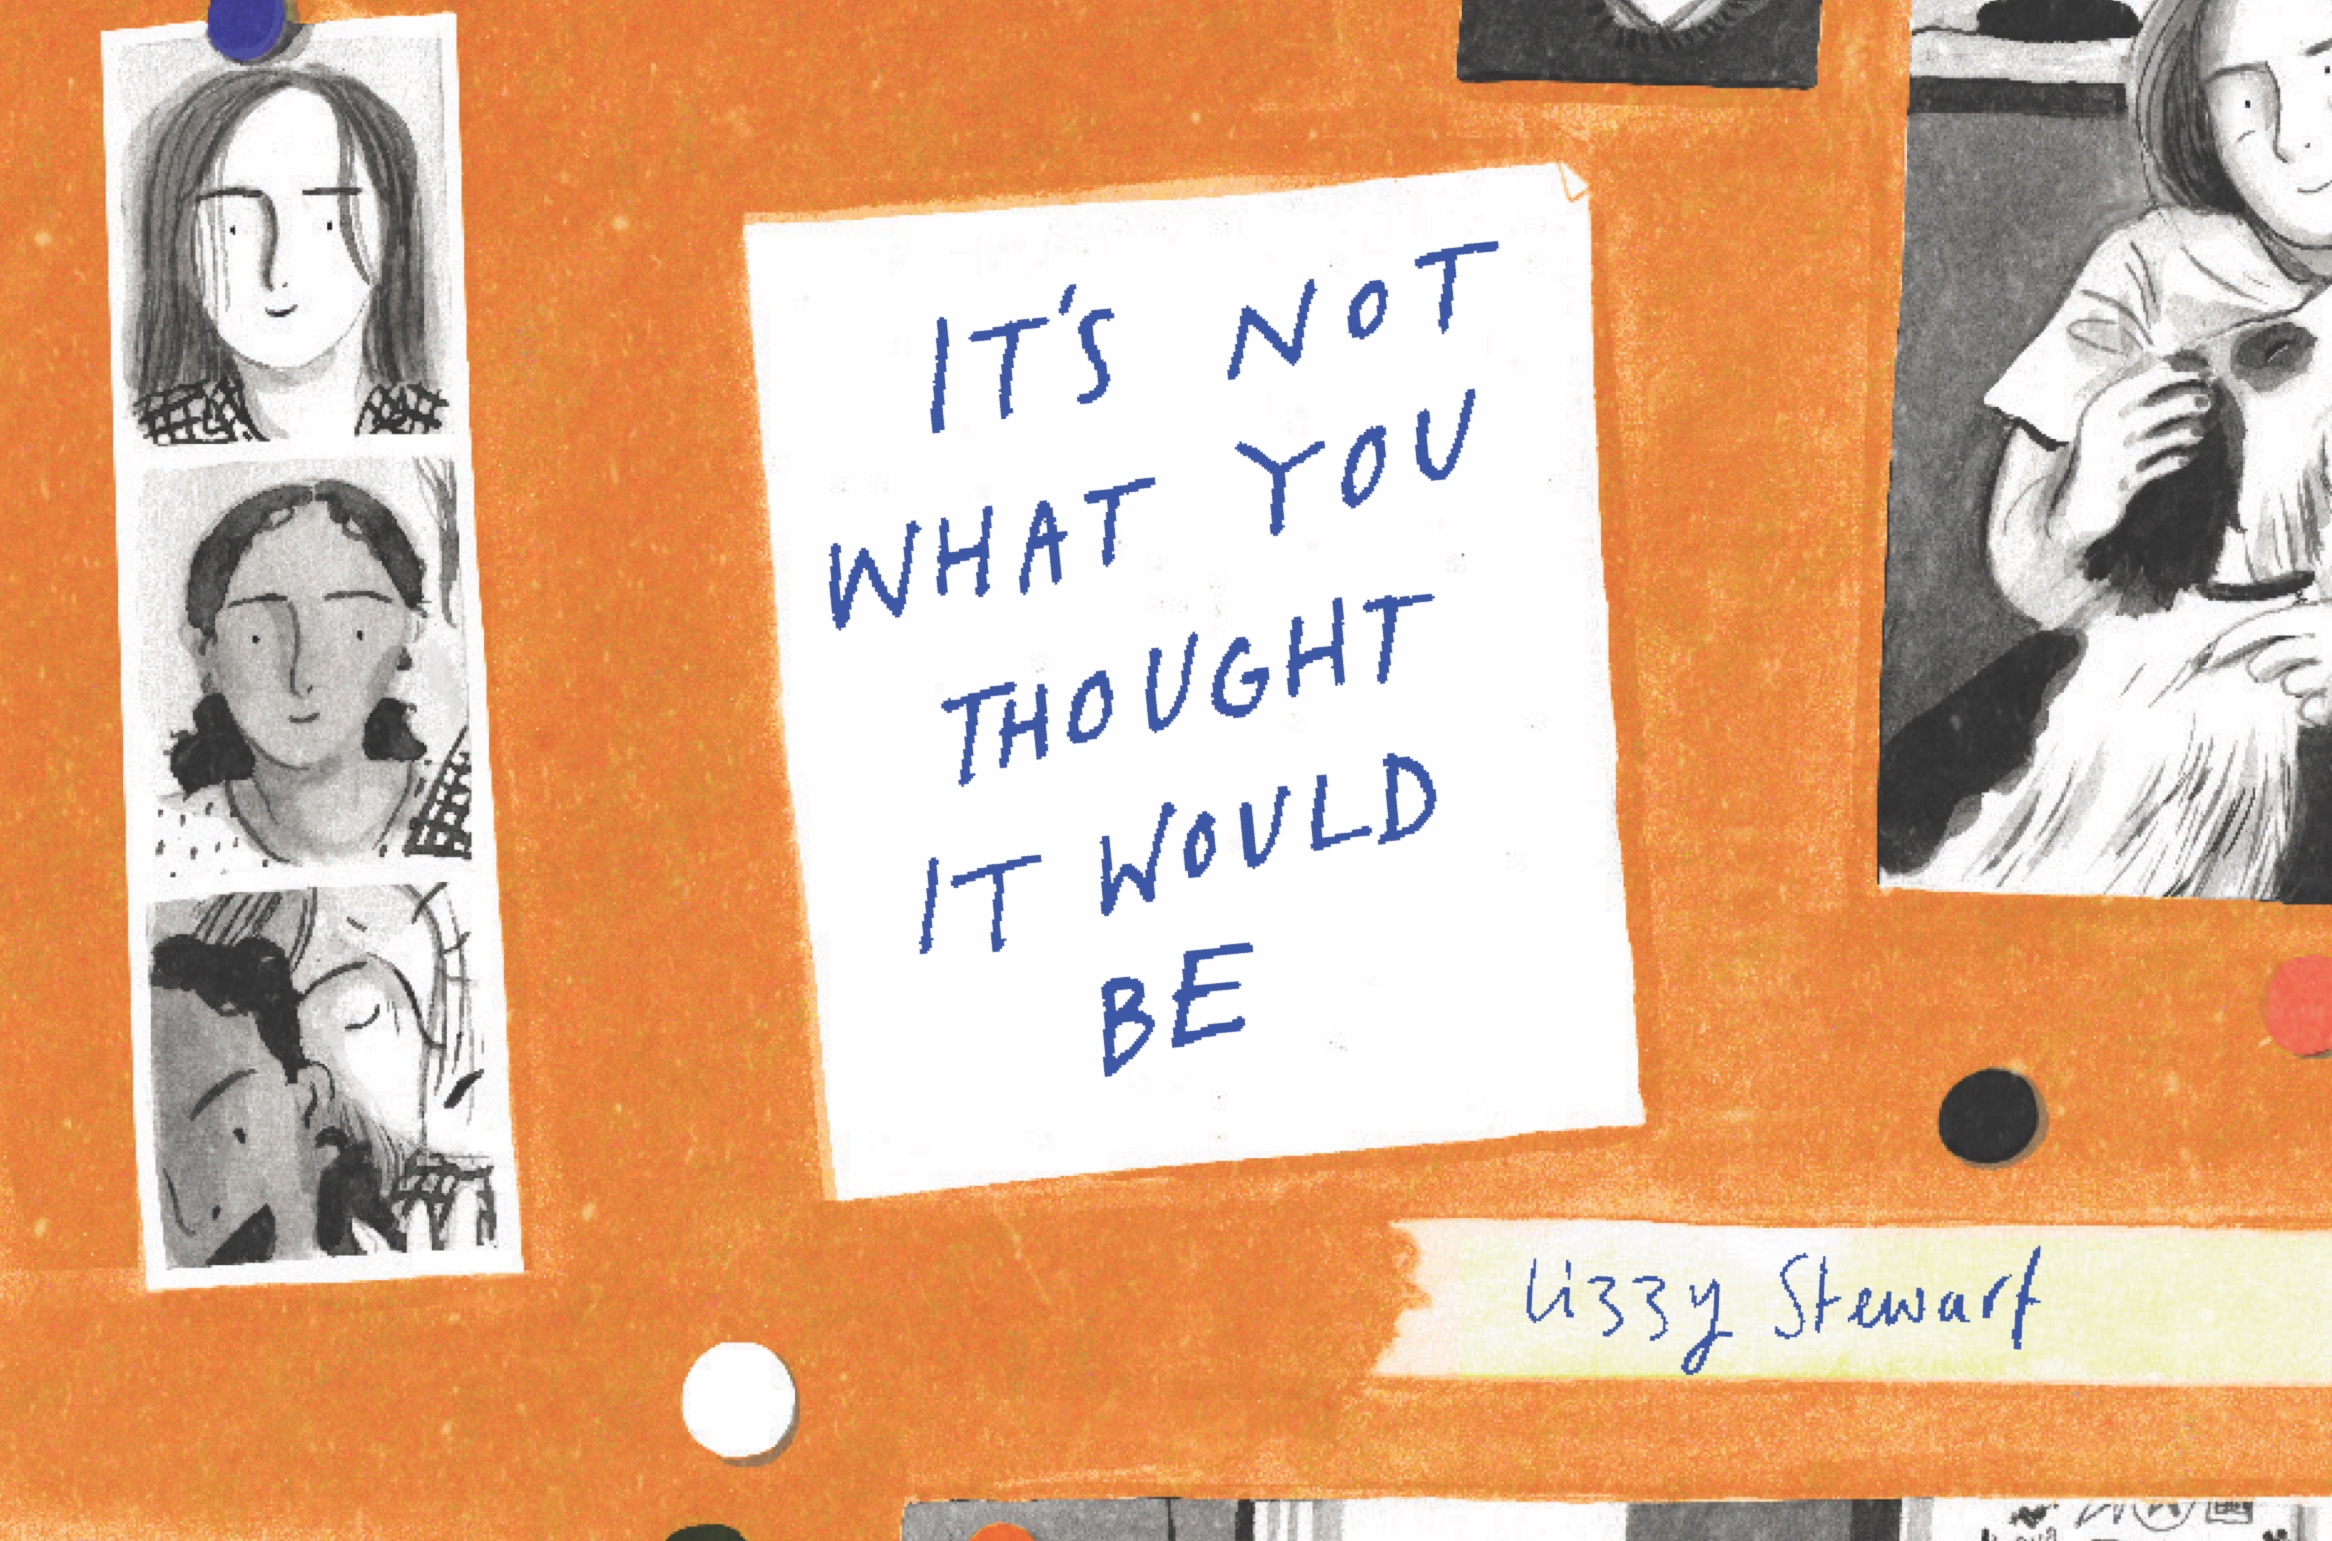 Lizzy Stewart talks art, adolescence in 'It's Not What You Thought It Would Be'